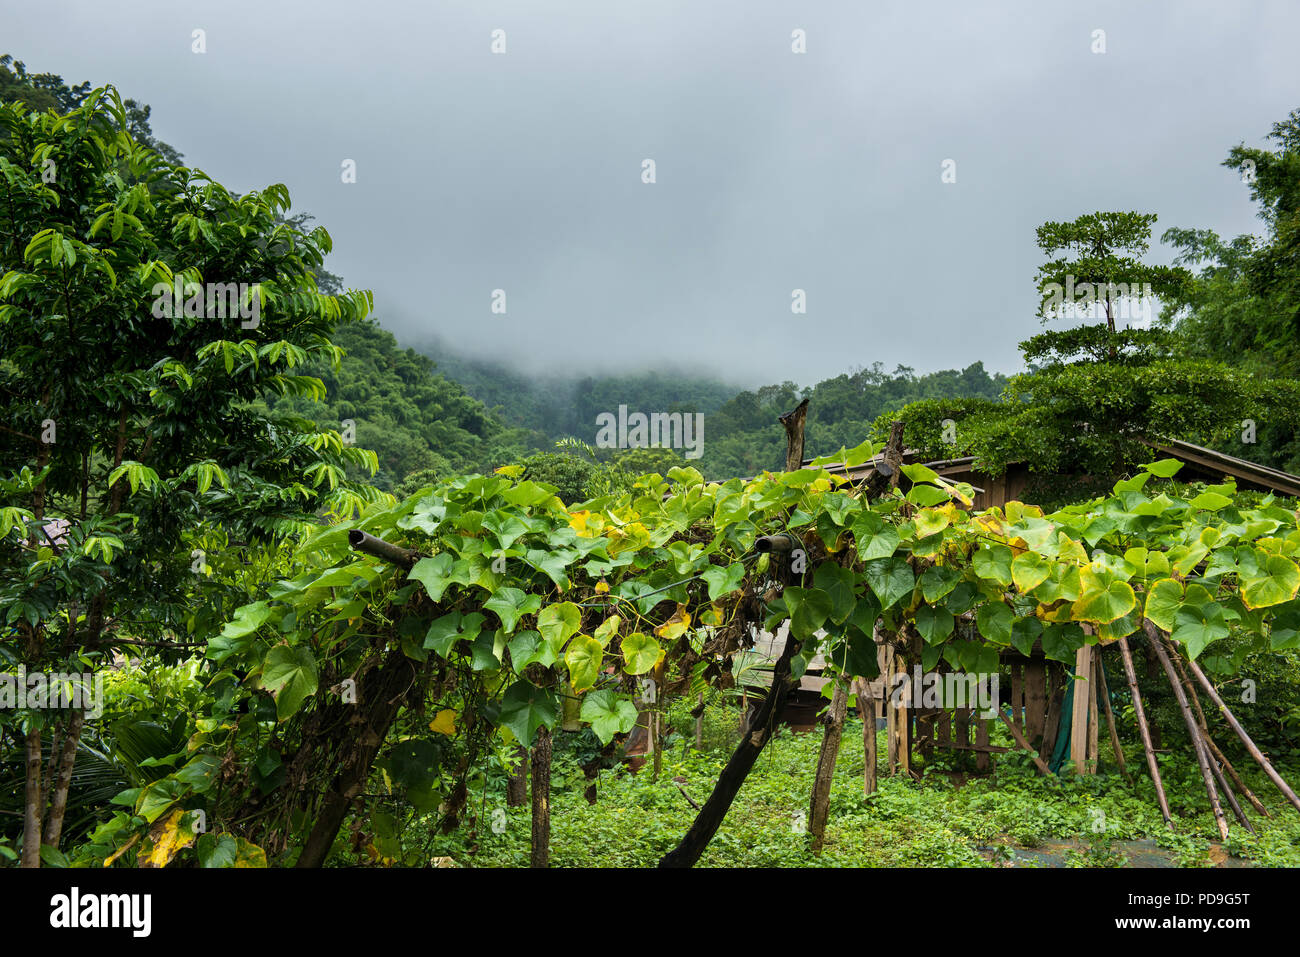 Chayote plant in the high land area in foggy and rainy morning Stock Photo